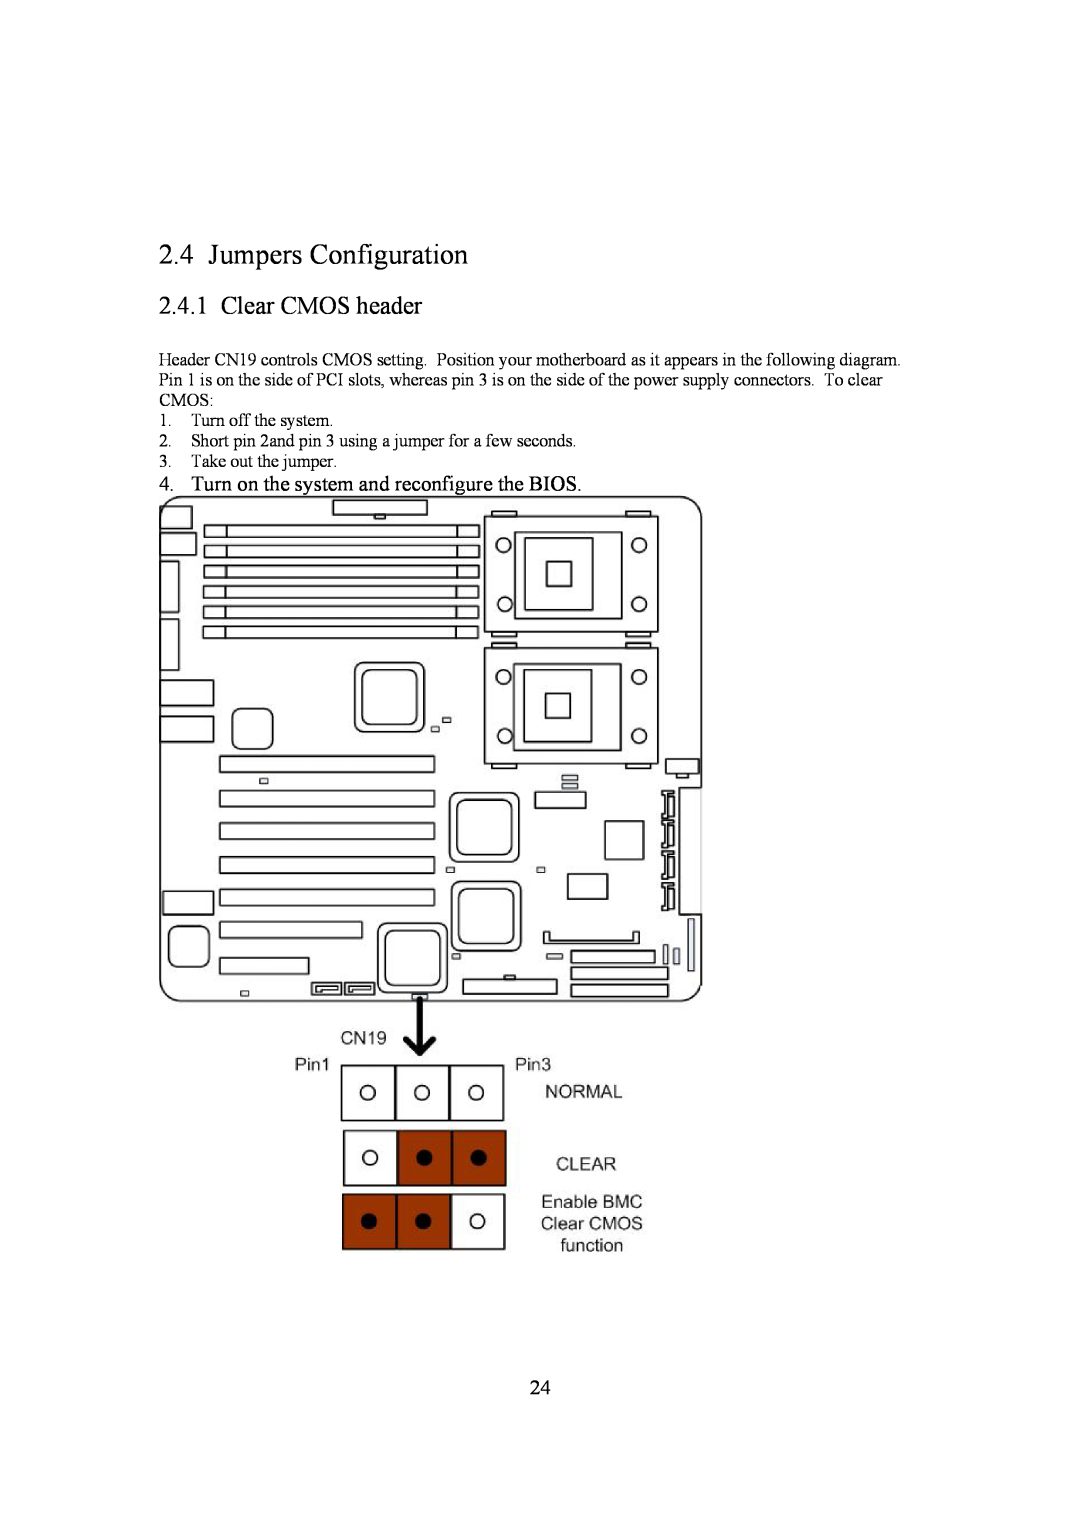 Intel LH500 user manual Jumpers Configuration, Clear CMOS header 